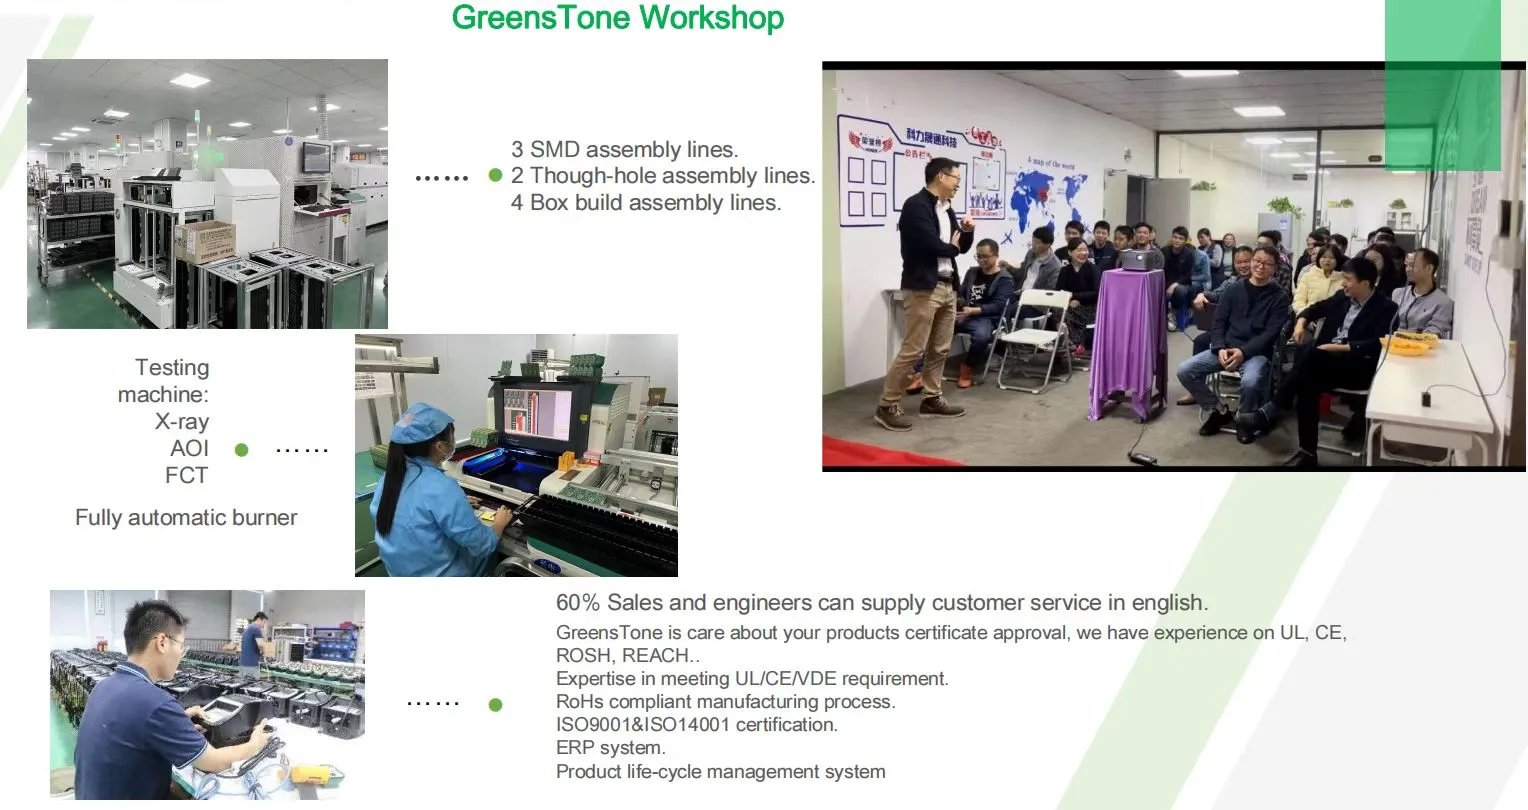 About GreensTone